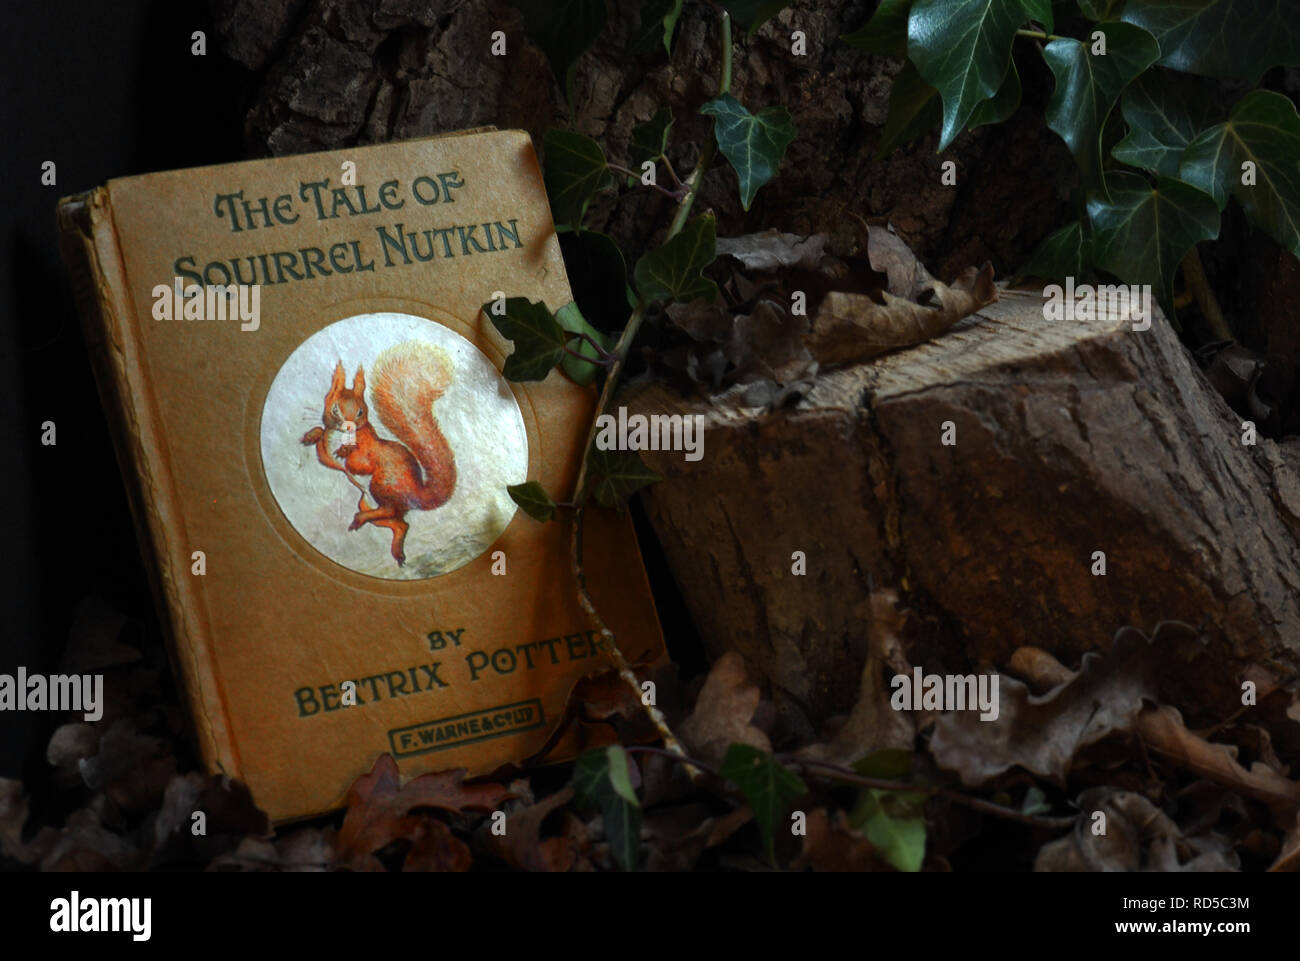 Vintage Beatrix Potter book and the Tale of Squirrel Nutkin. Still Life Stock Photo